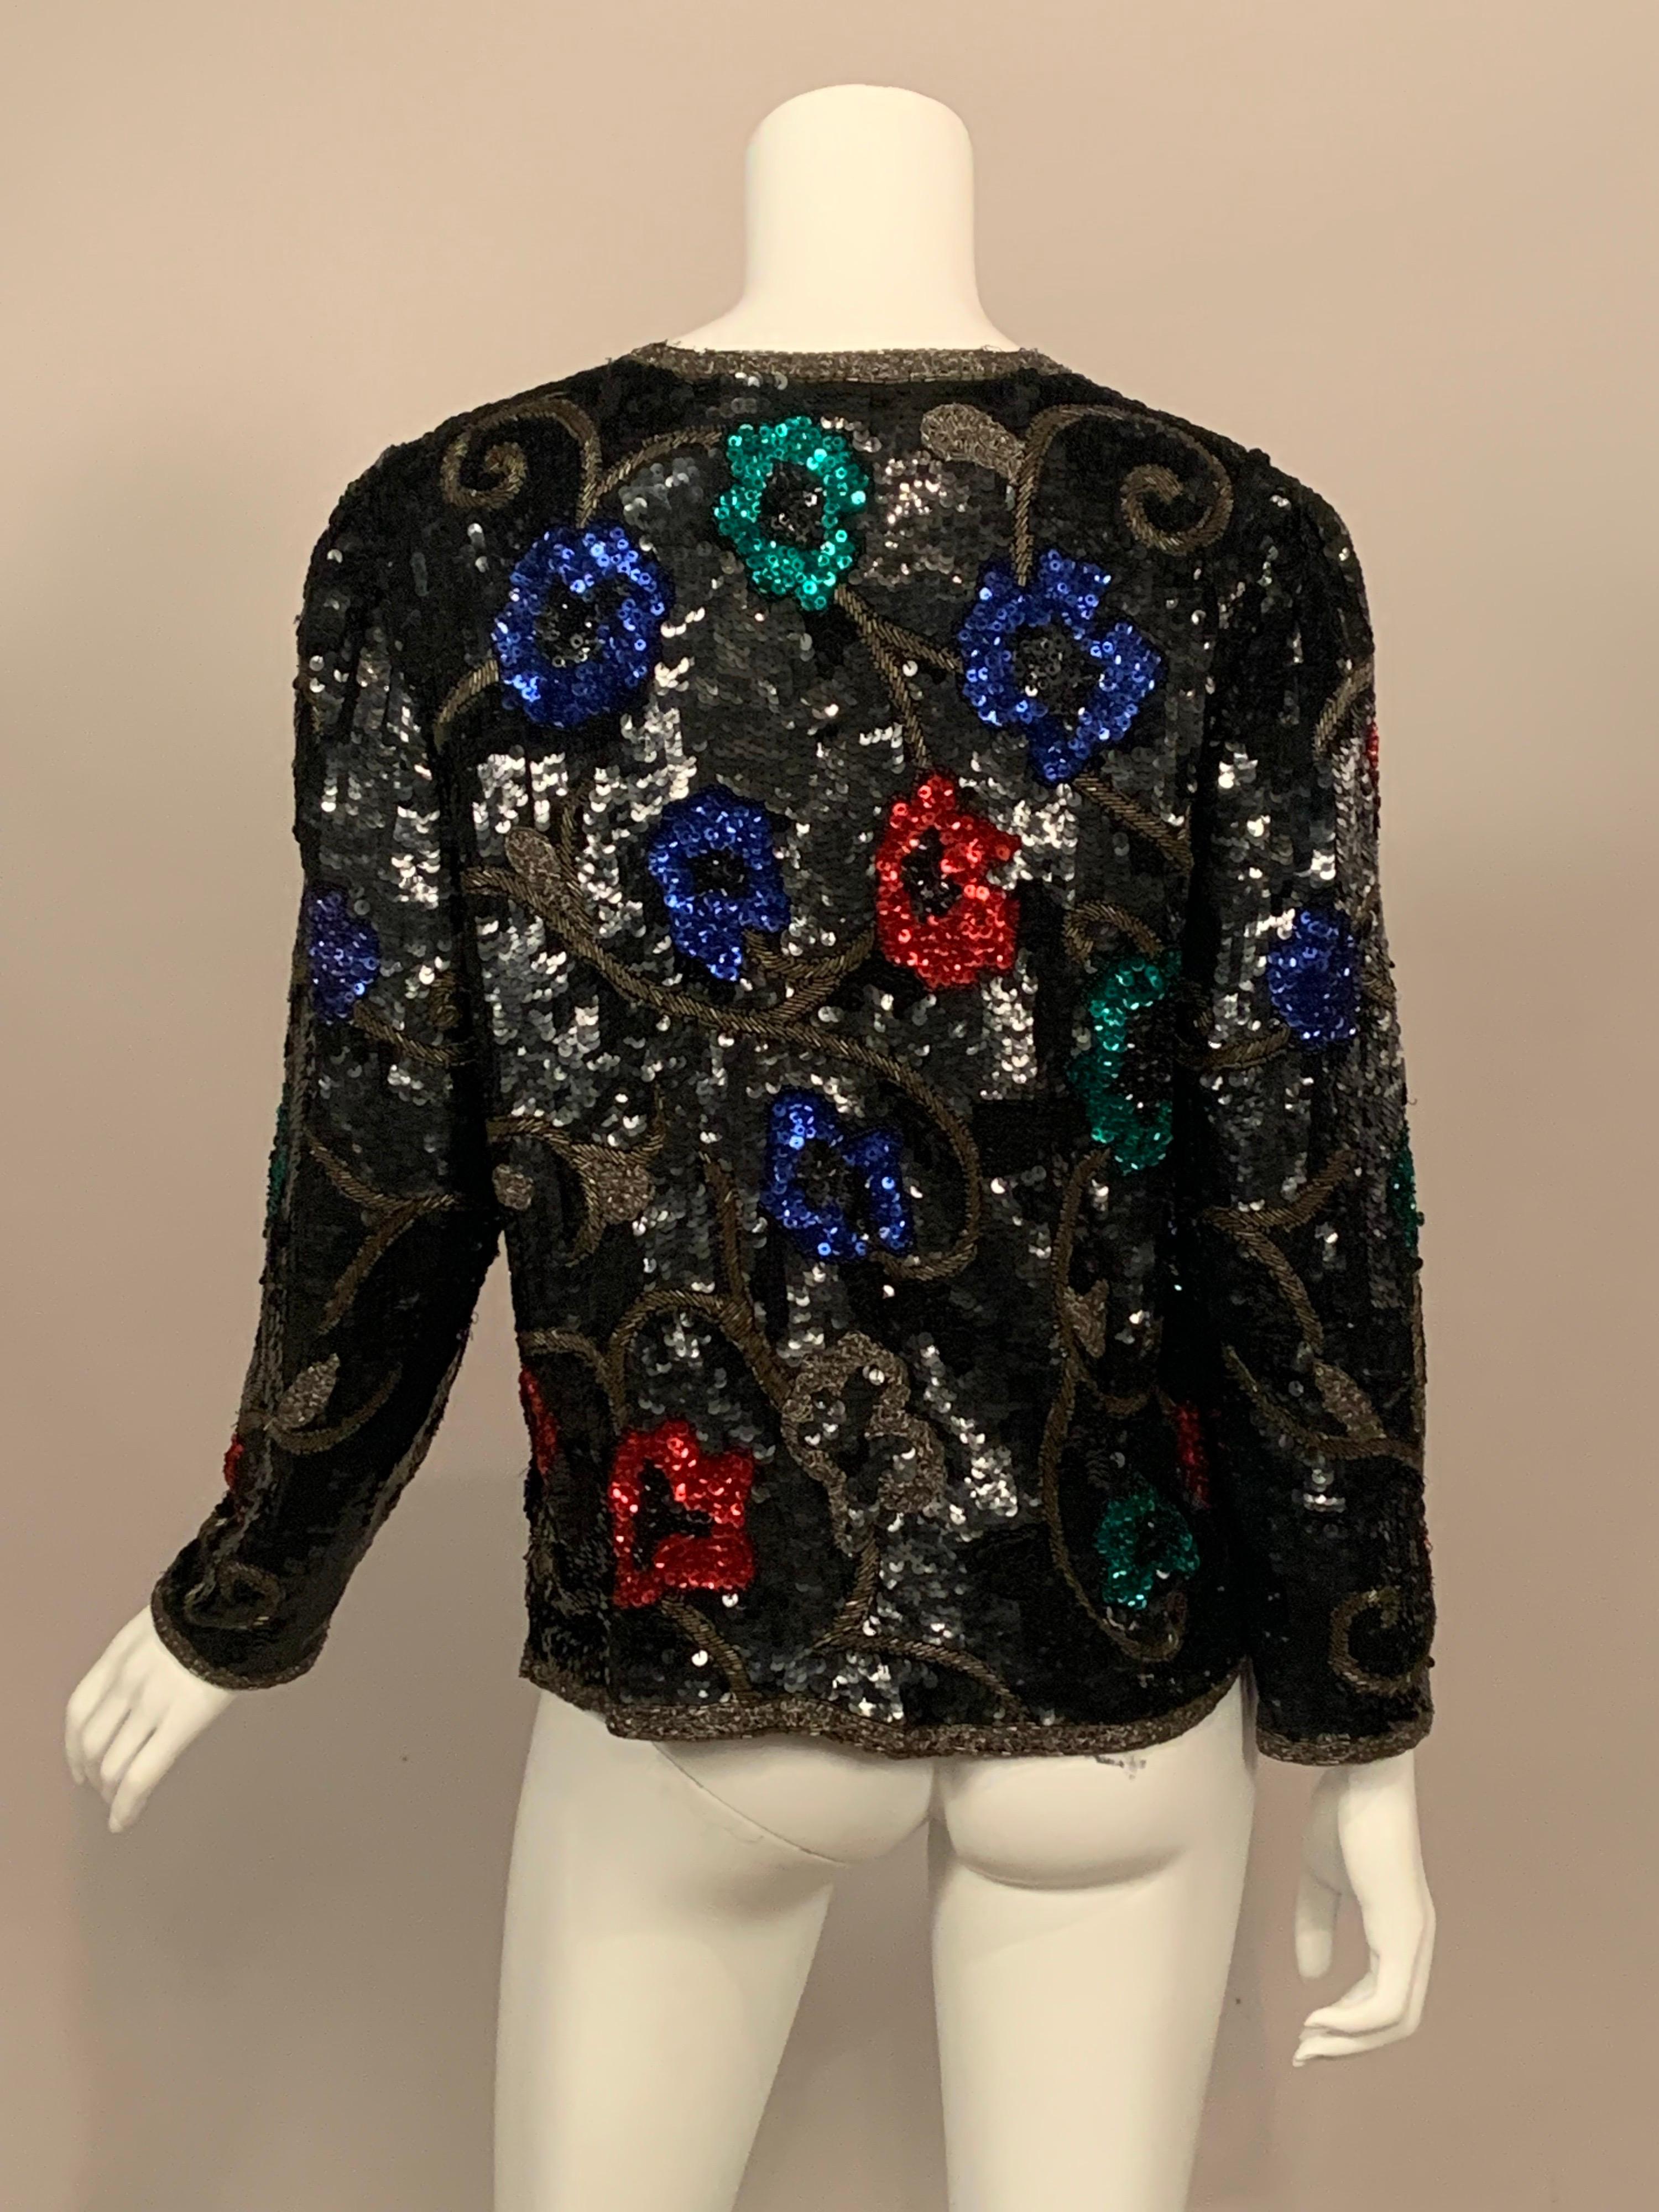 Black Sequin Jacket with Colorful Flower and Vine Decoration In Excellent Condition For Sale In New Hope, PA